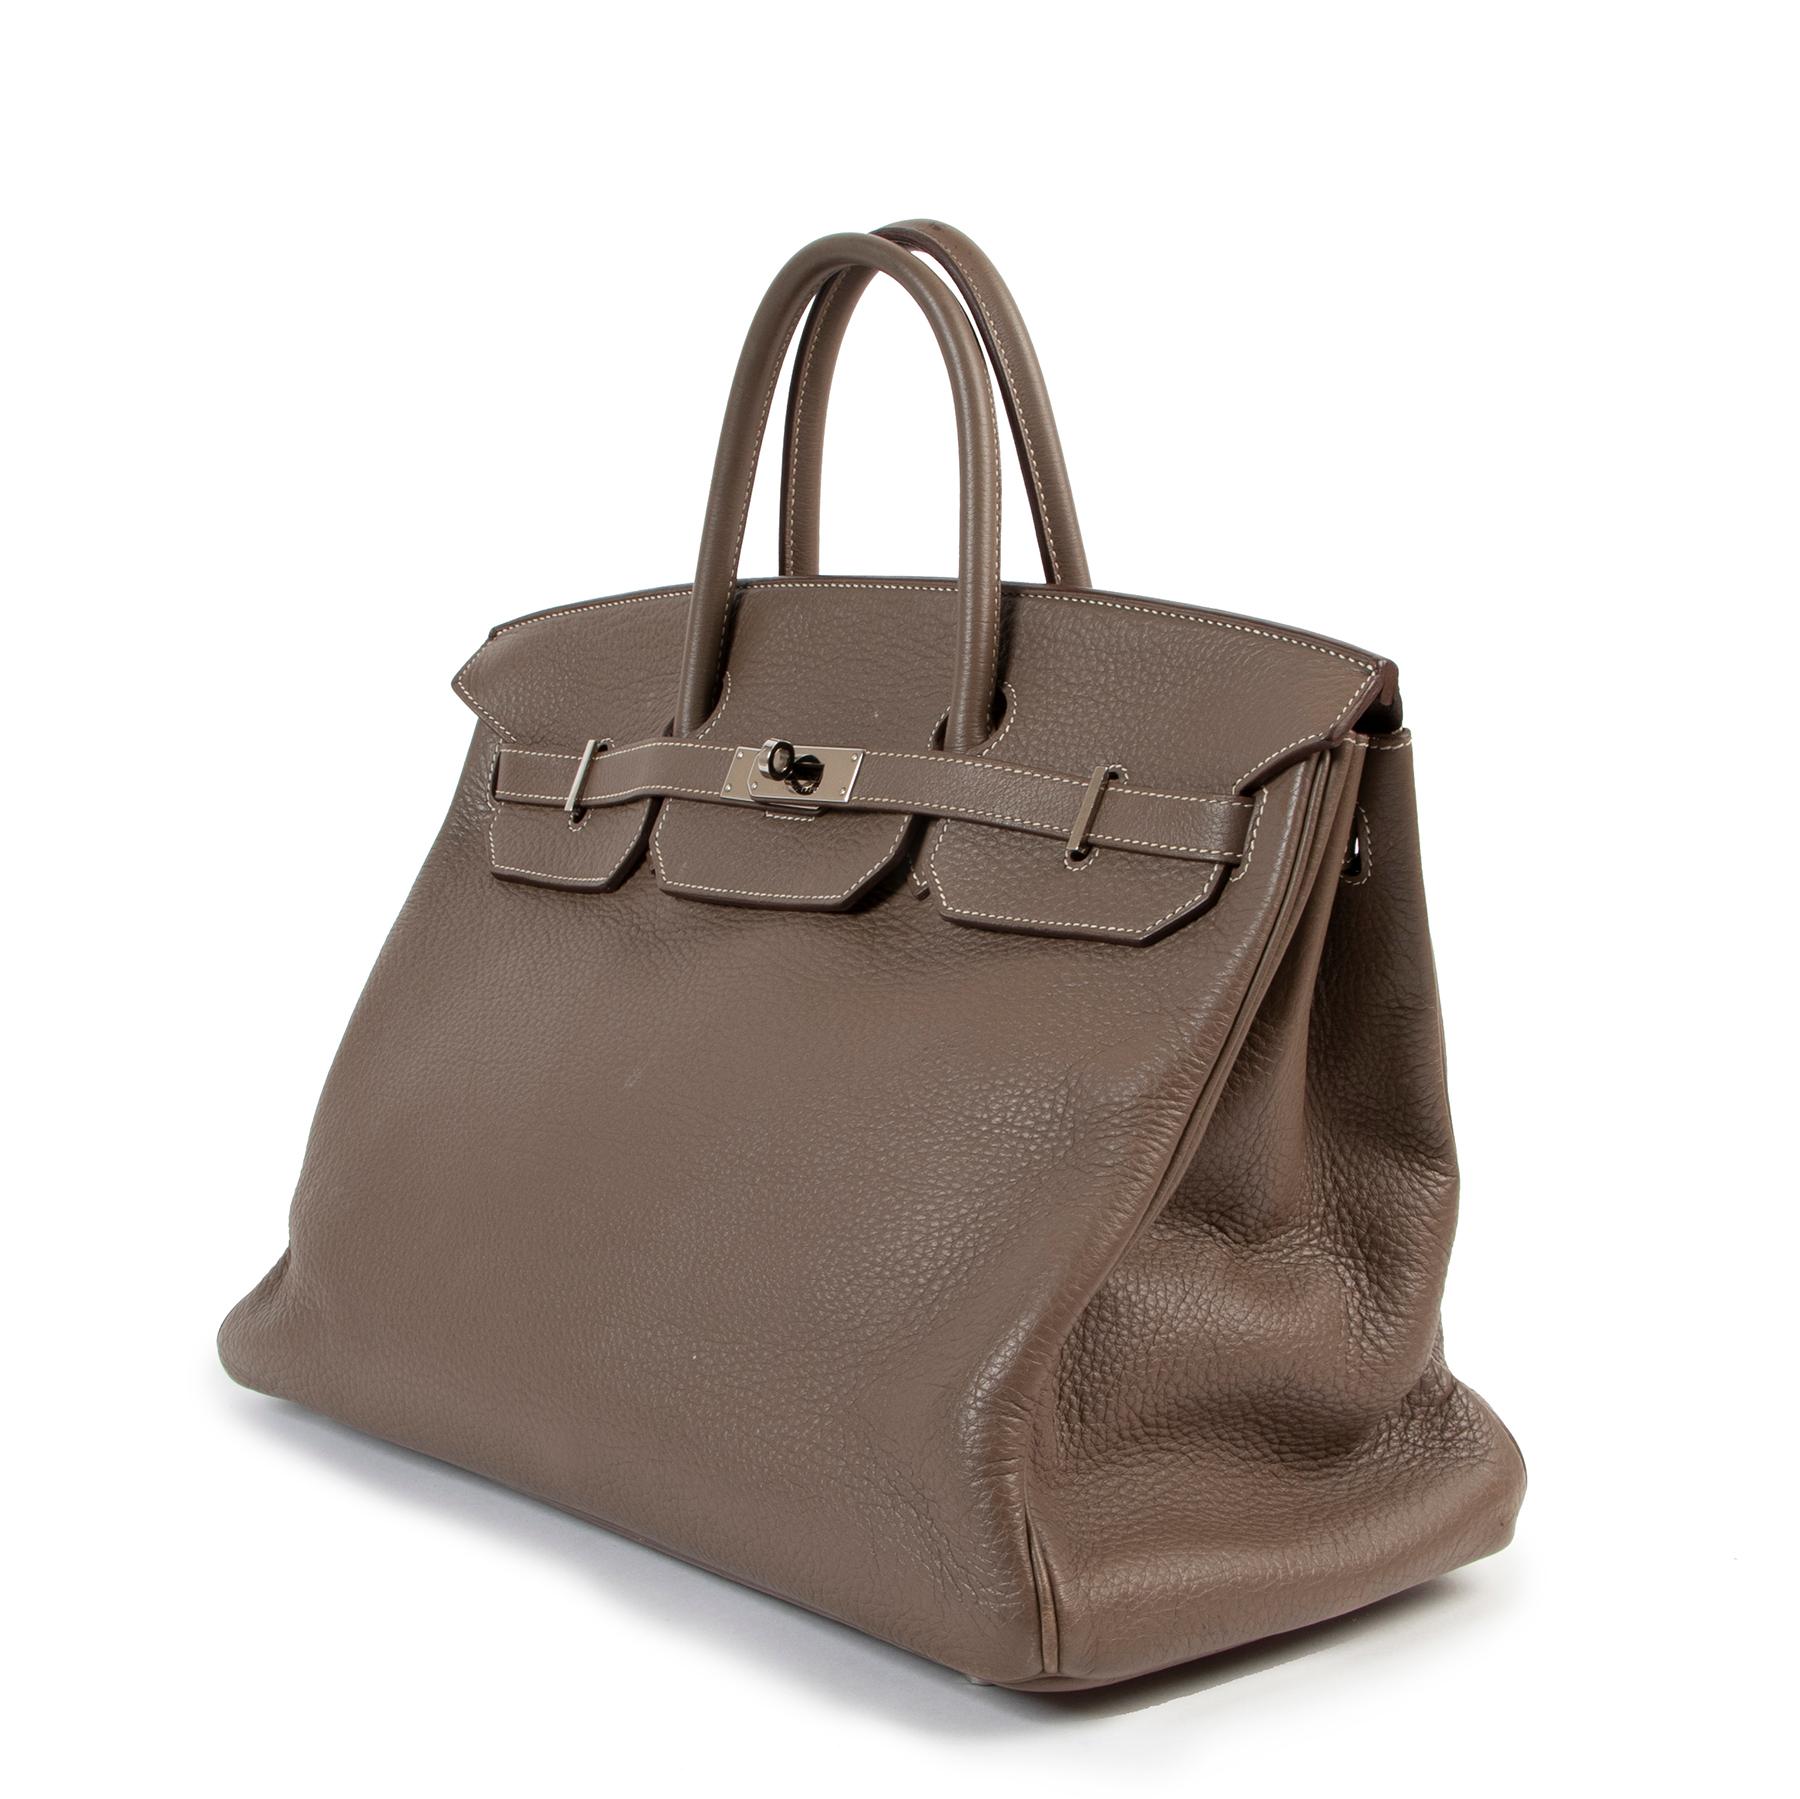 Hermès Birkin 40 Etoupe Taurillon Clemence PHW

Etoupe has emerged to become a very popular, greyisch brown.

The beauty of the clemence leather is appreciatedas it naturally possesses a texture that is neither too hard nor too soft, making it one